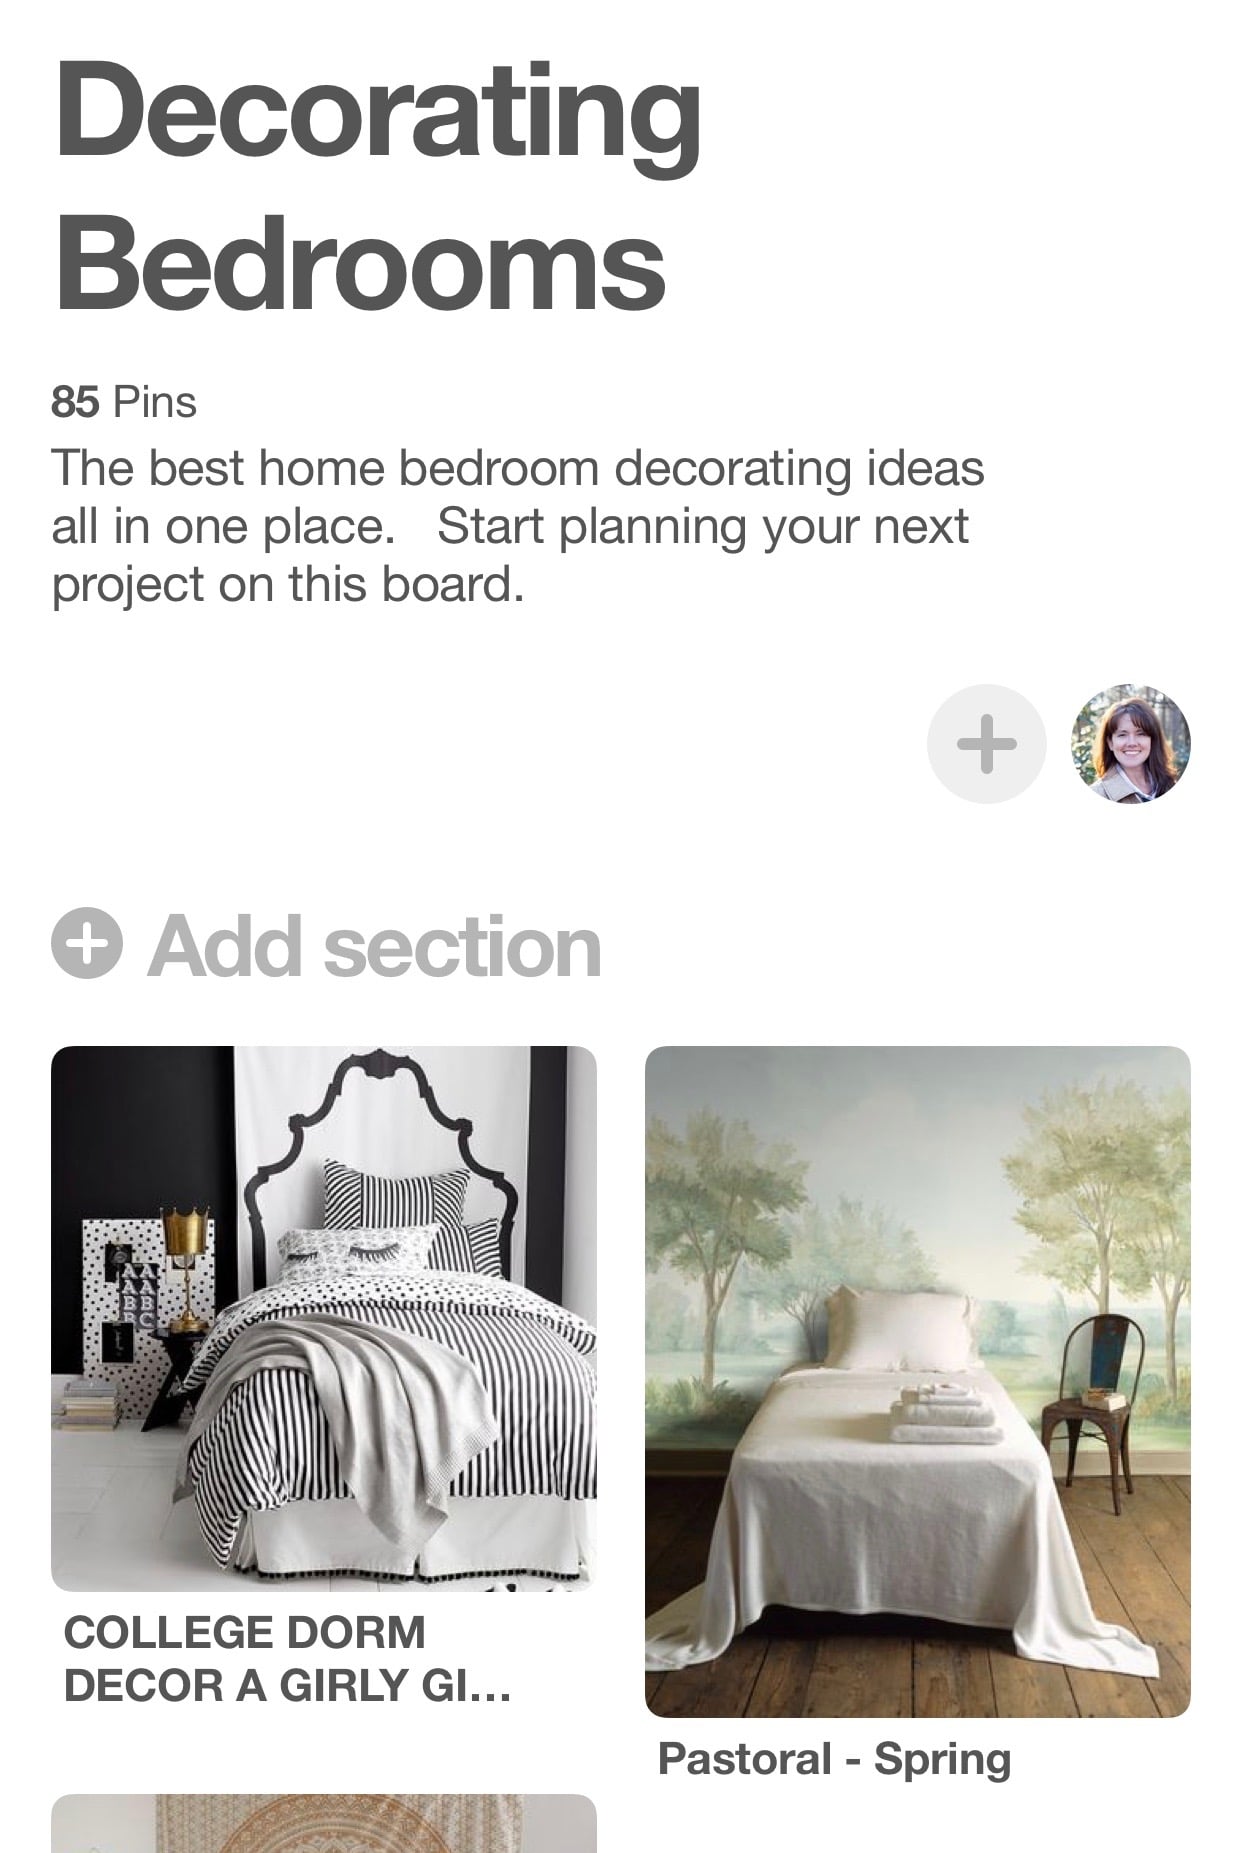 How to decorate your dorm room using Pinterest